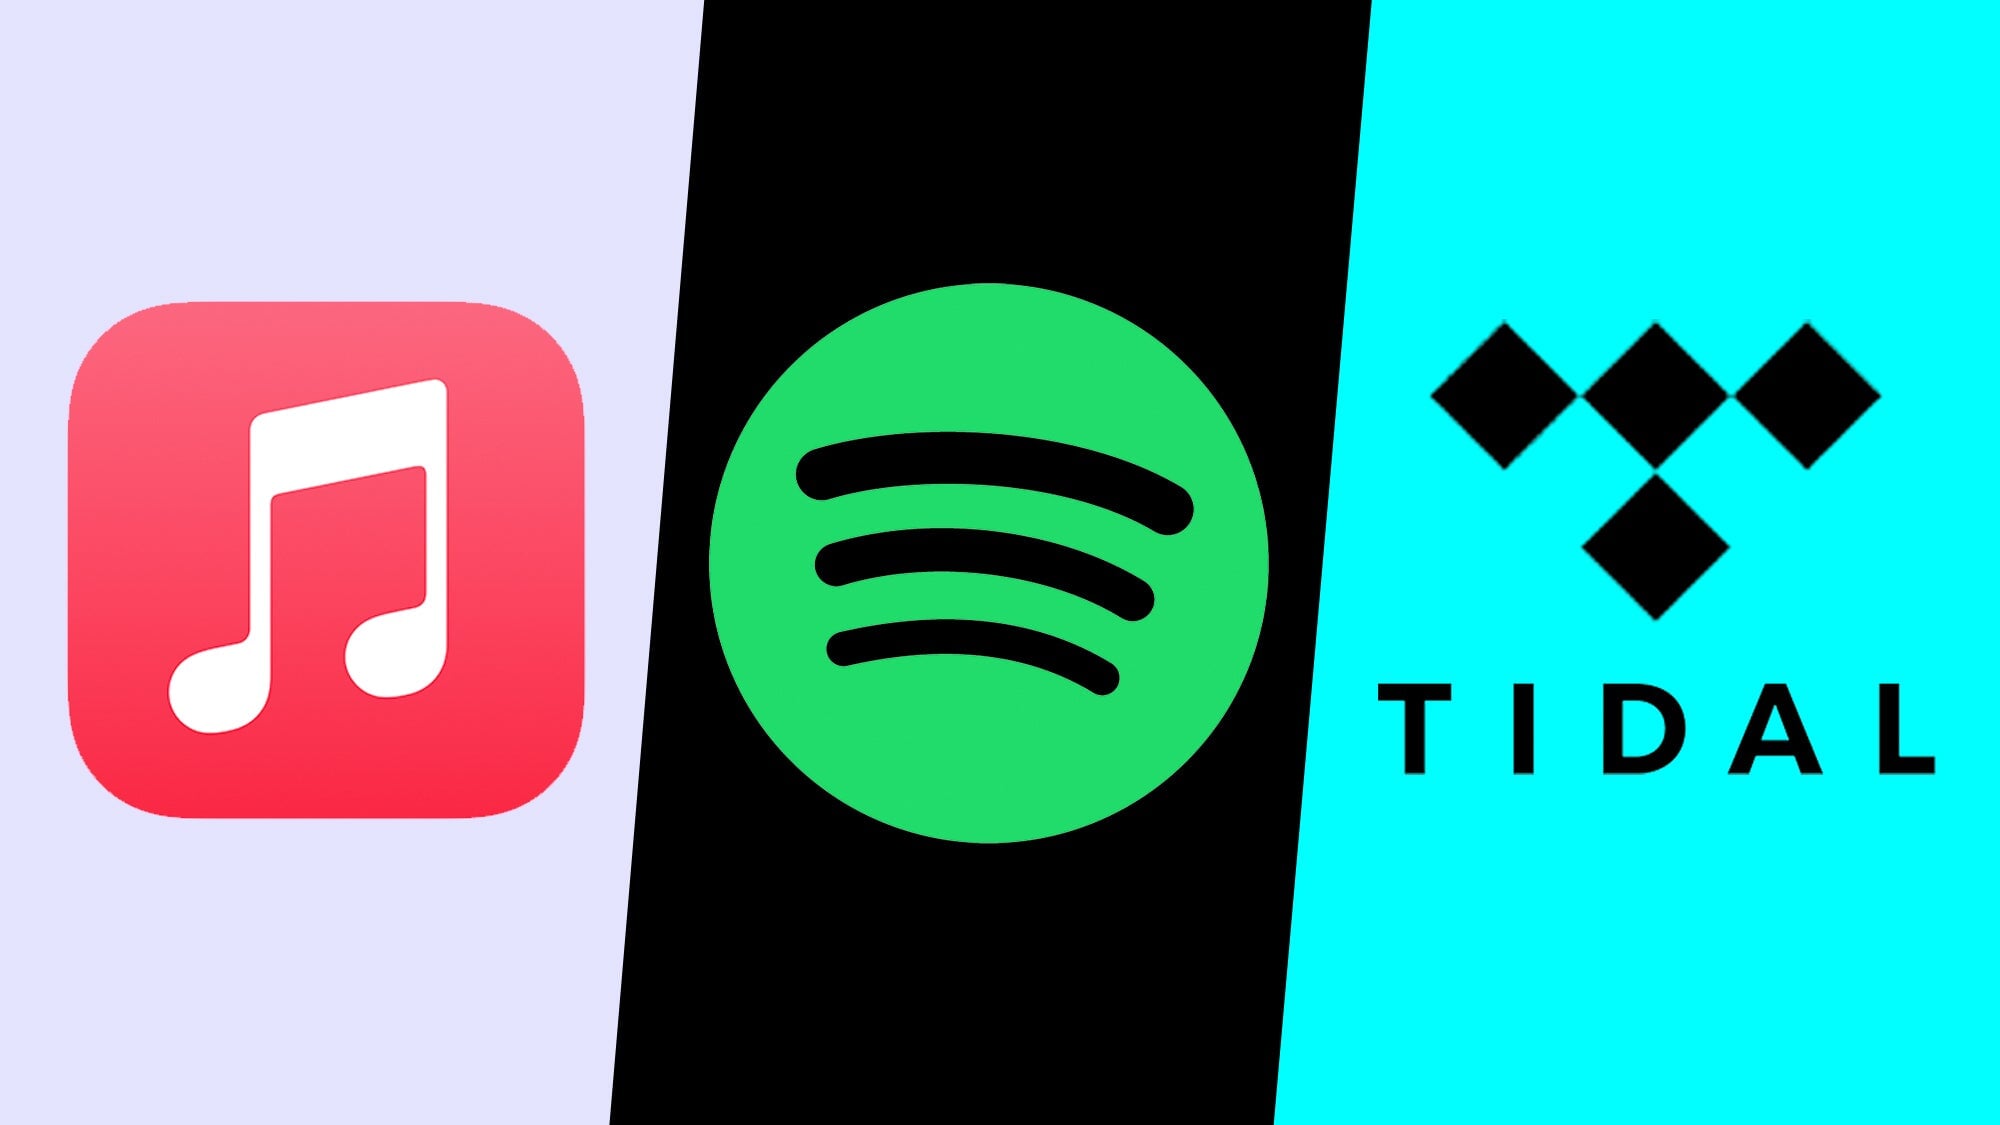 Mastering for Spotify and other Streaming Platforms